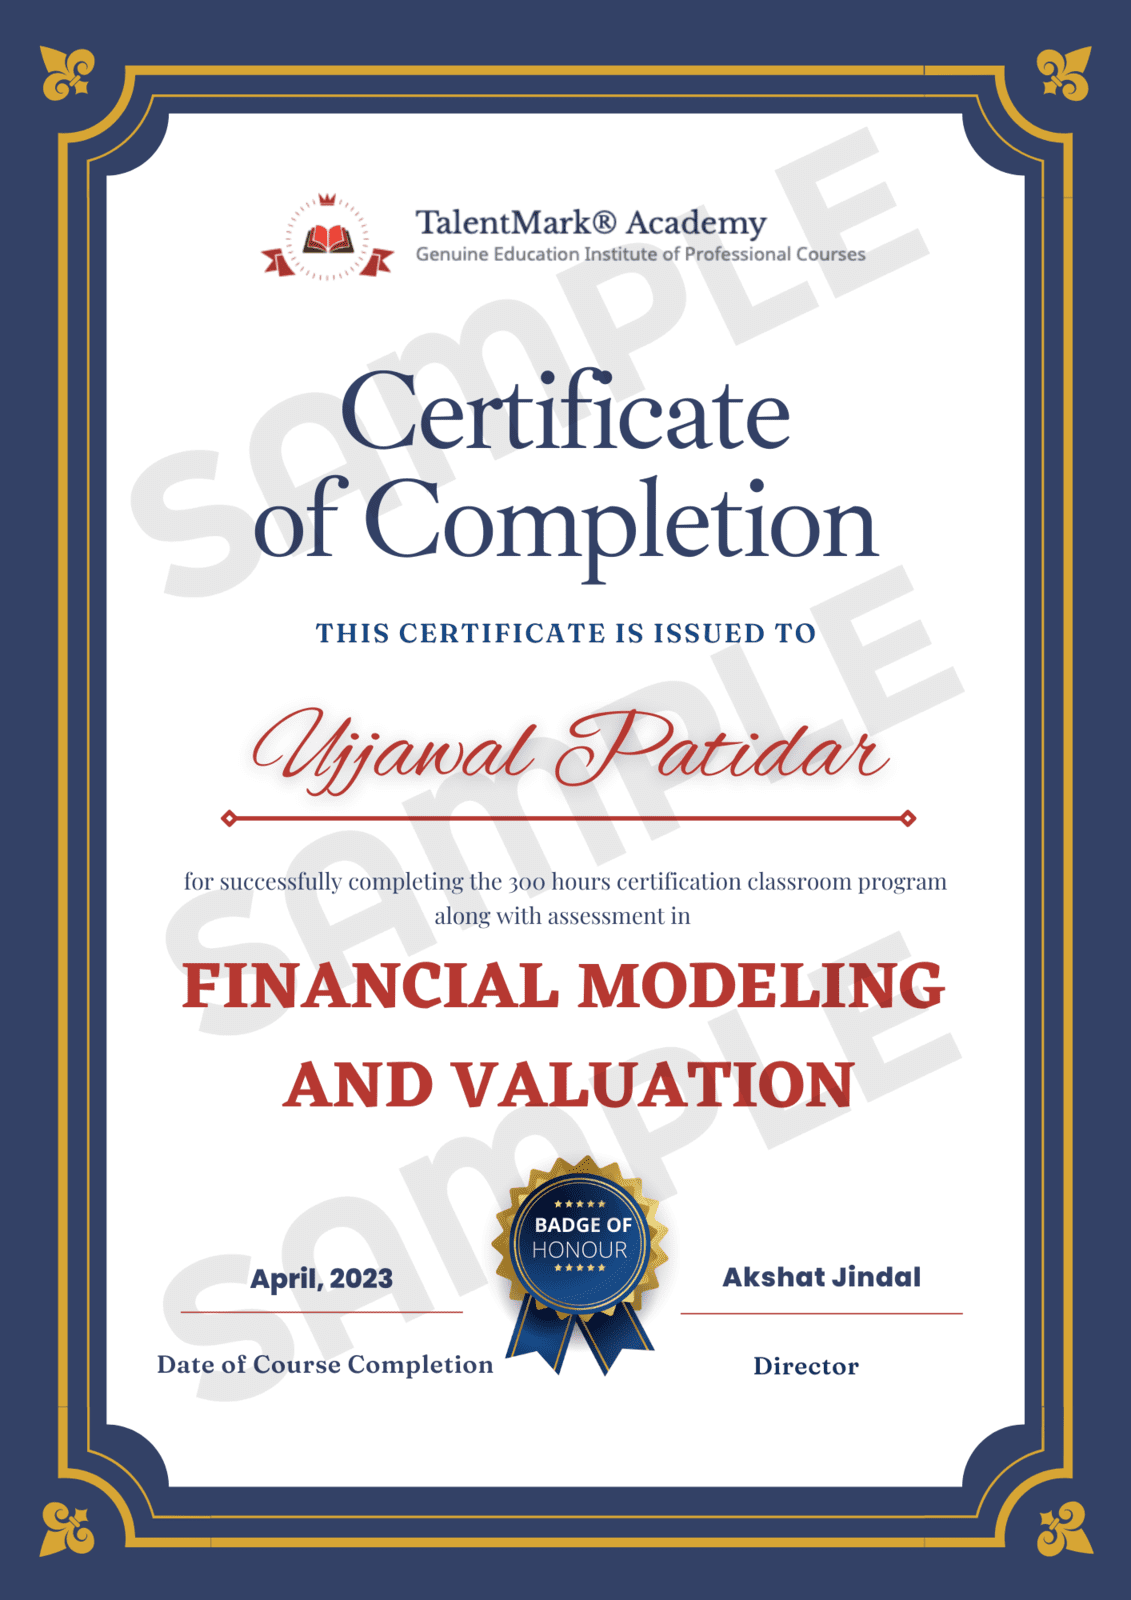 FINANCIAL MODELING COURSE CERTFICATE